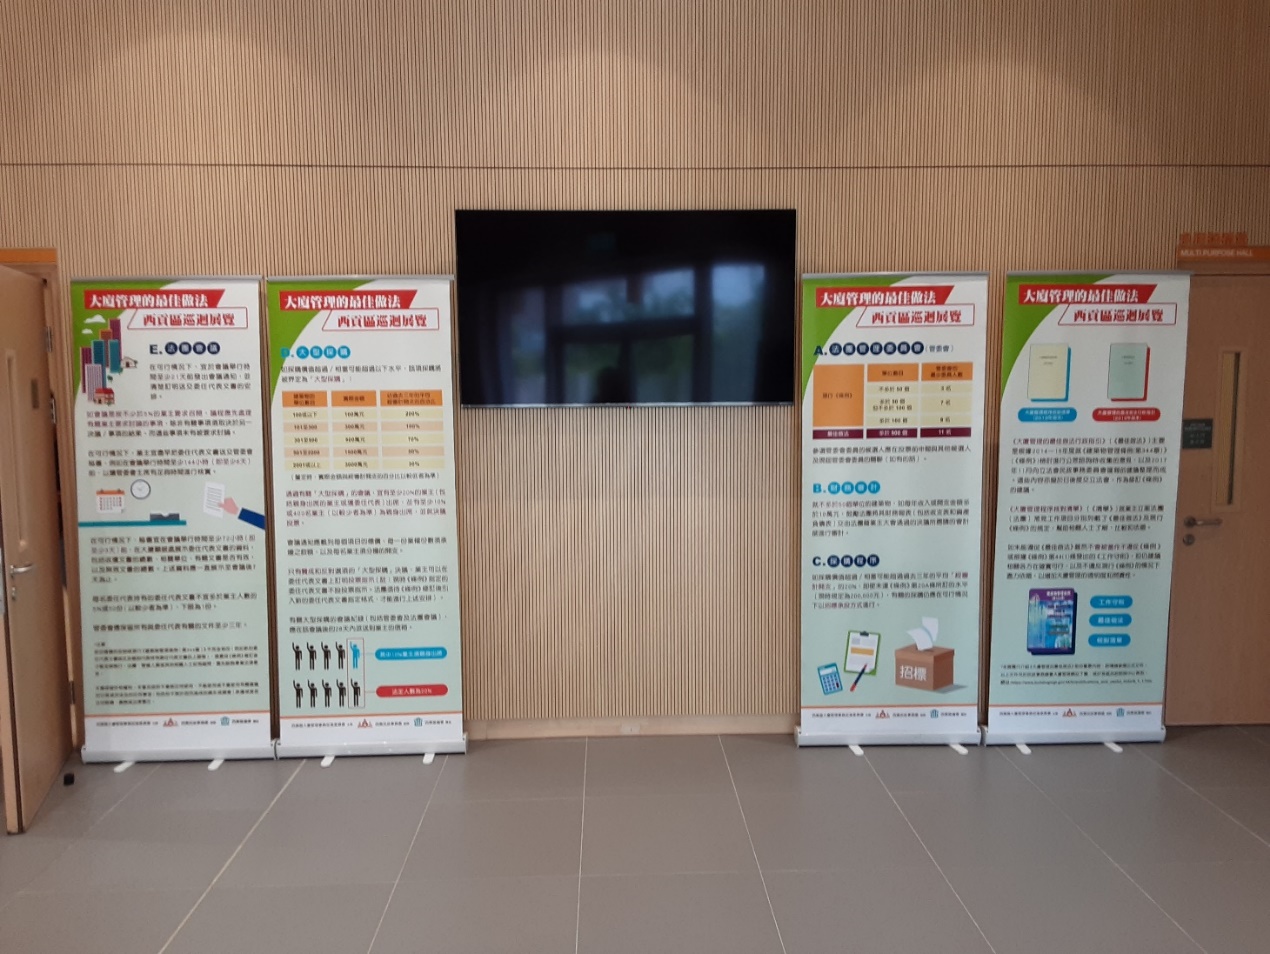 Sai Kung District Roving Exhibition of Easy Roll Banners on the “Best Practices on Building Management” (Chi Shin Activity Centre) (1 July to 30 September 2021)